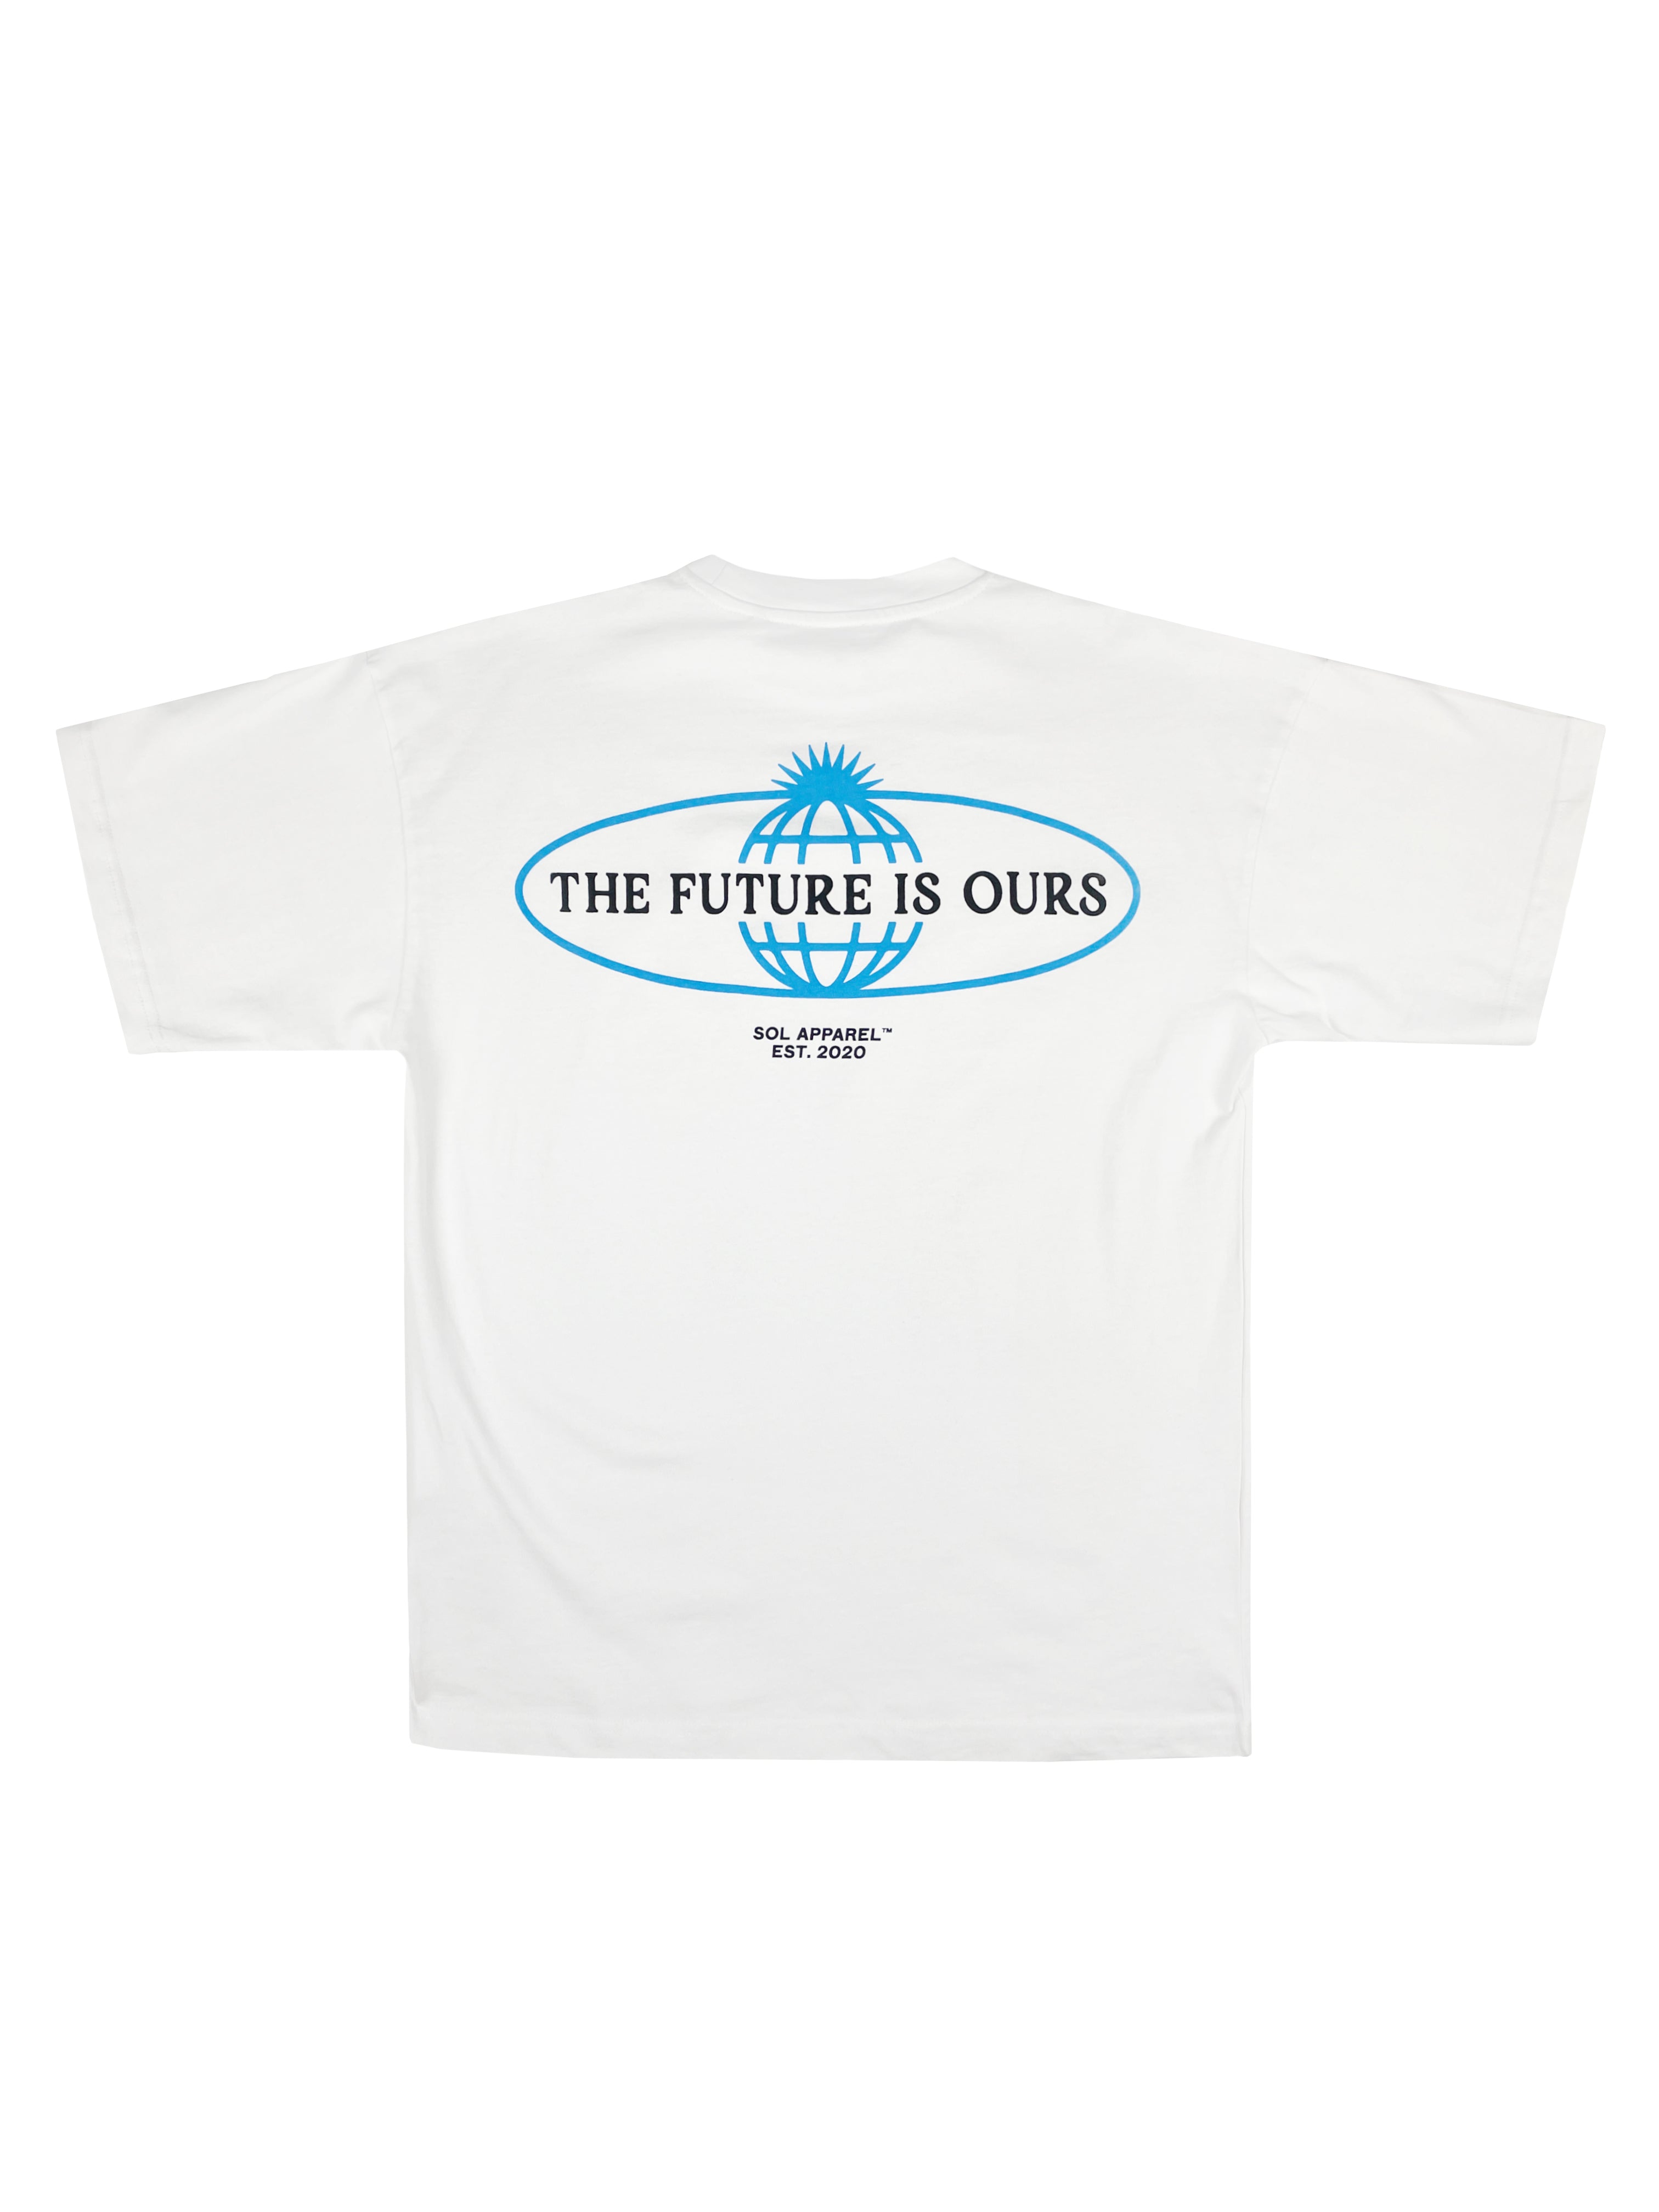 retro cotton gym tshirt with the future is ours printed on the back in black text with a blue globe logo